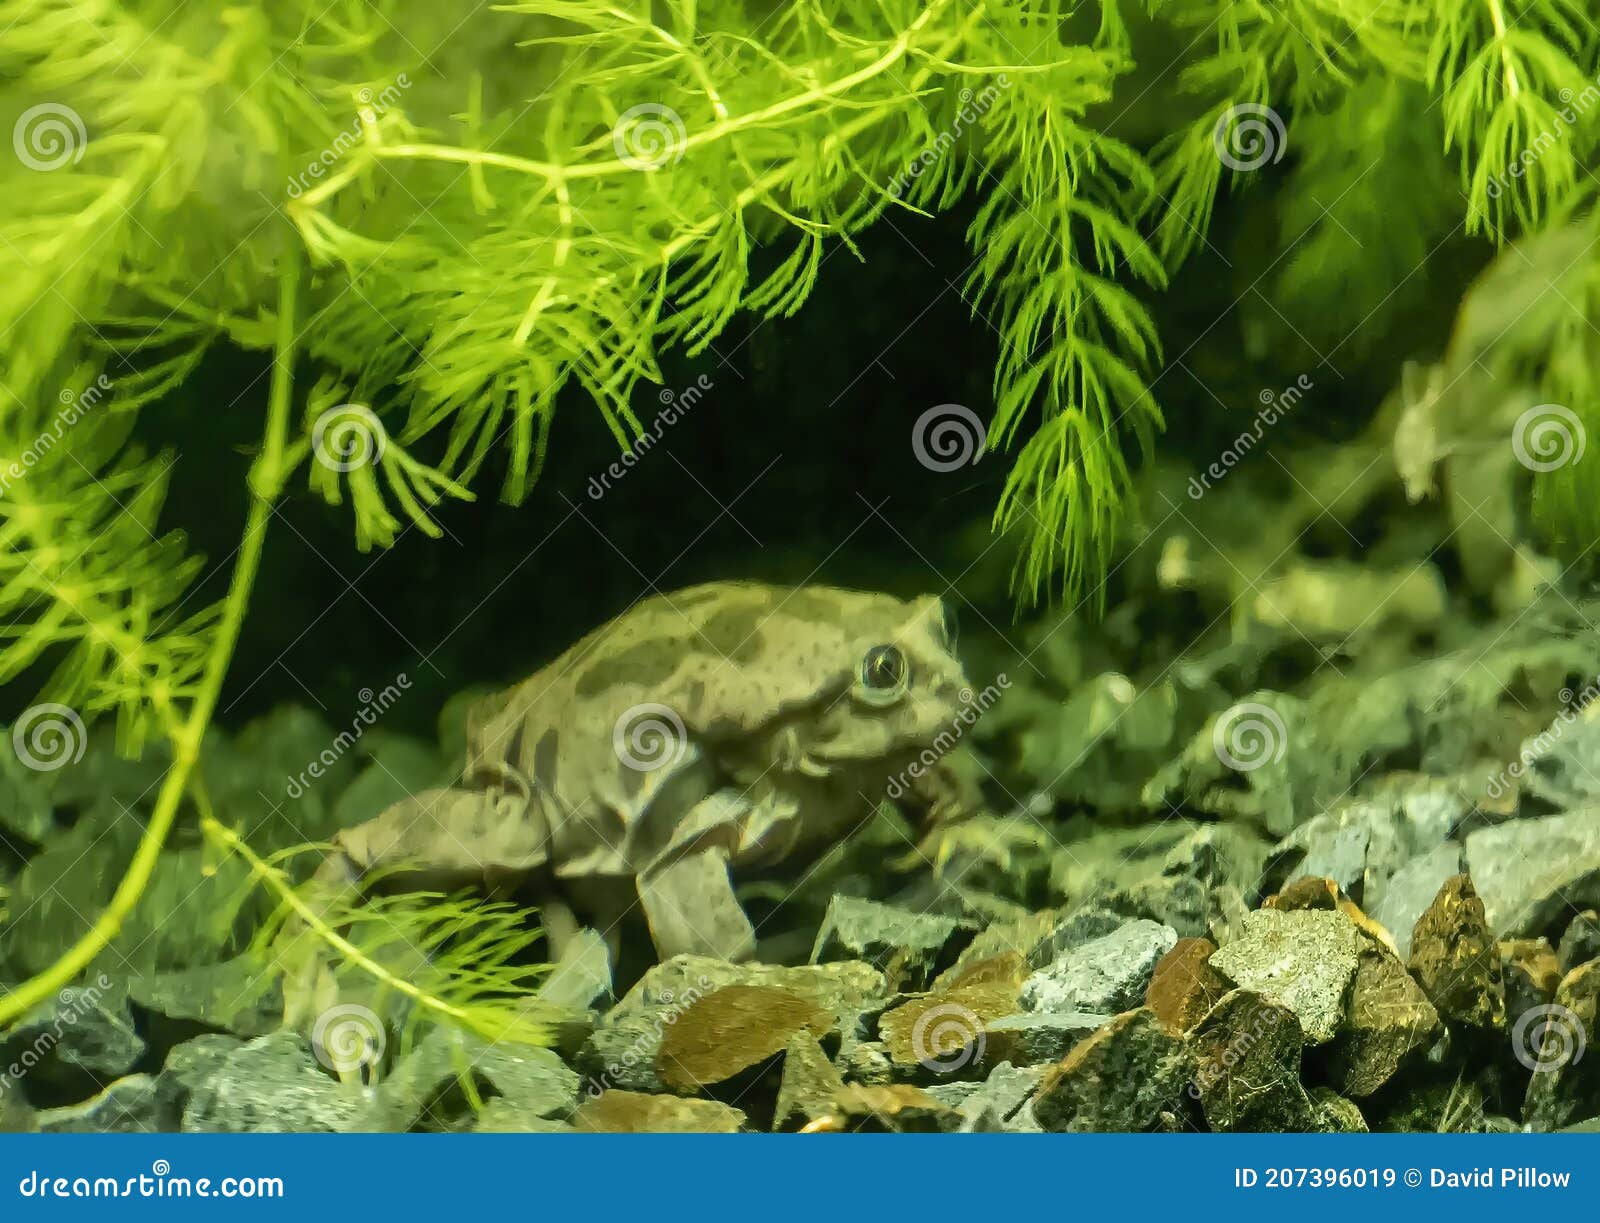 telmatobius culeus, commonly known as the titicaca water frog, underwater at the dallas city zoo.